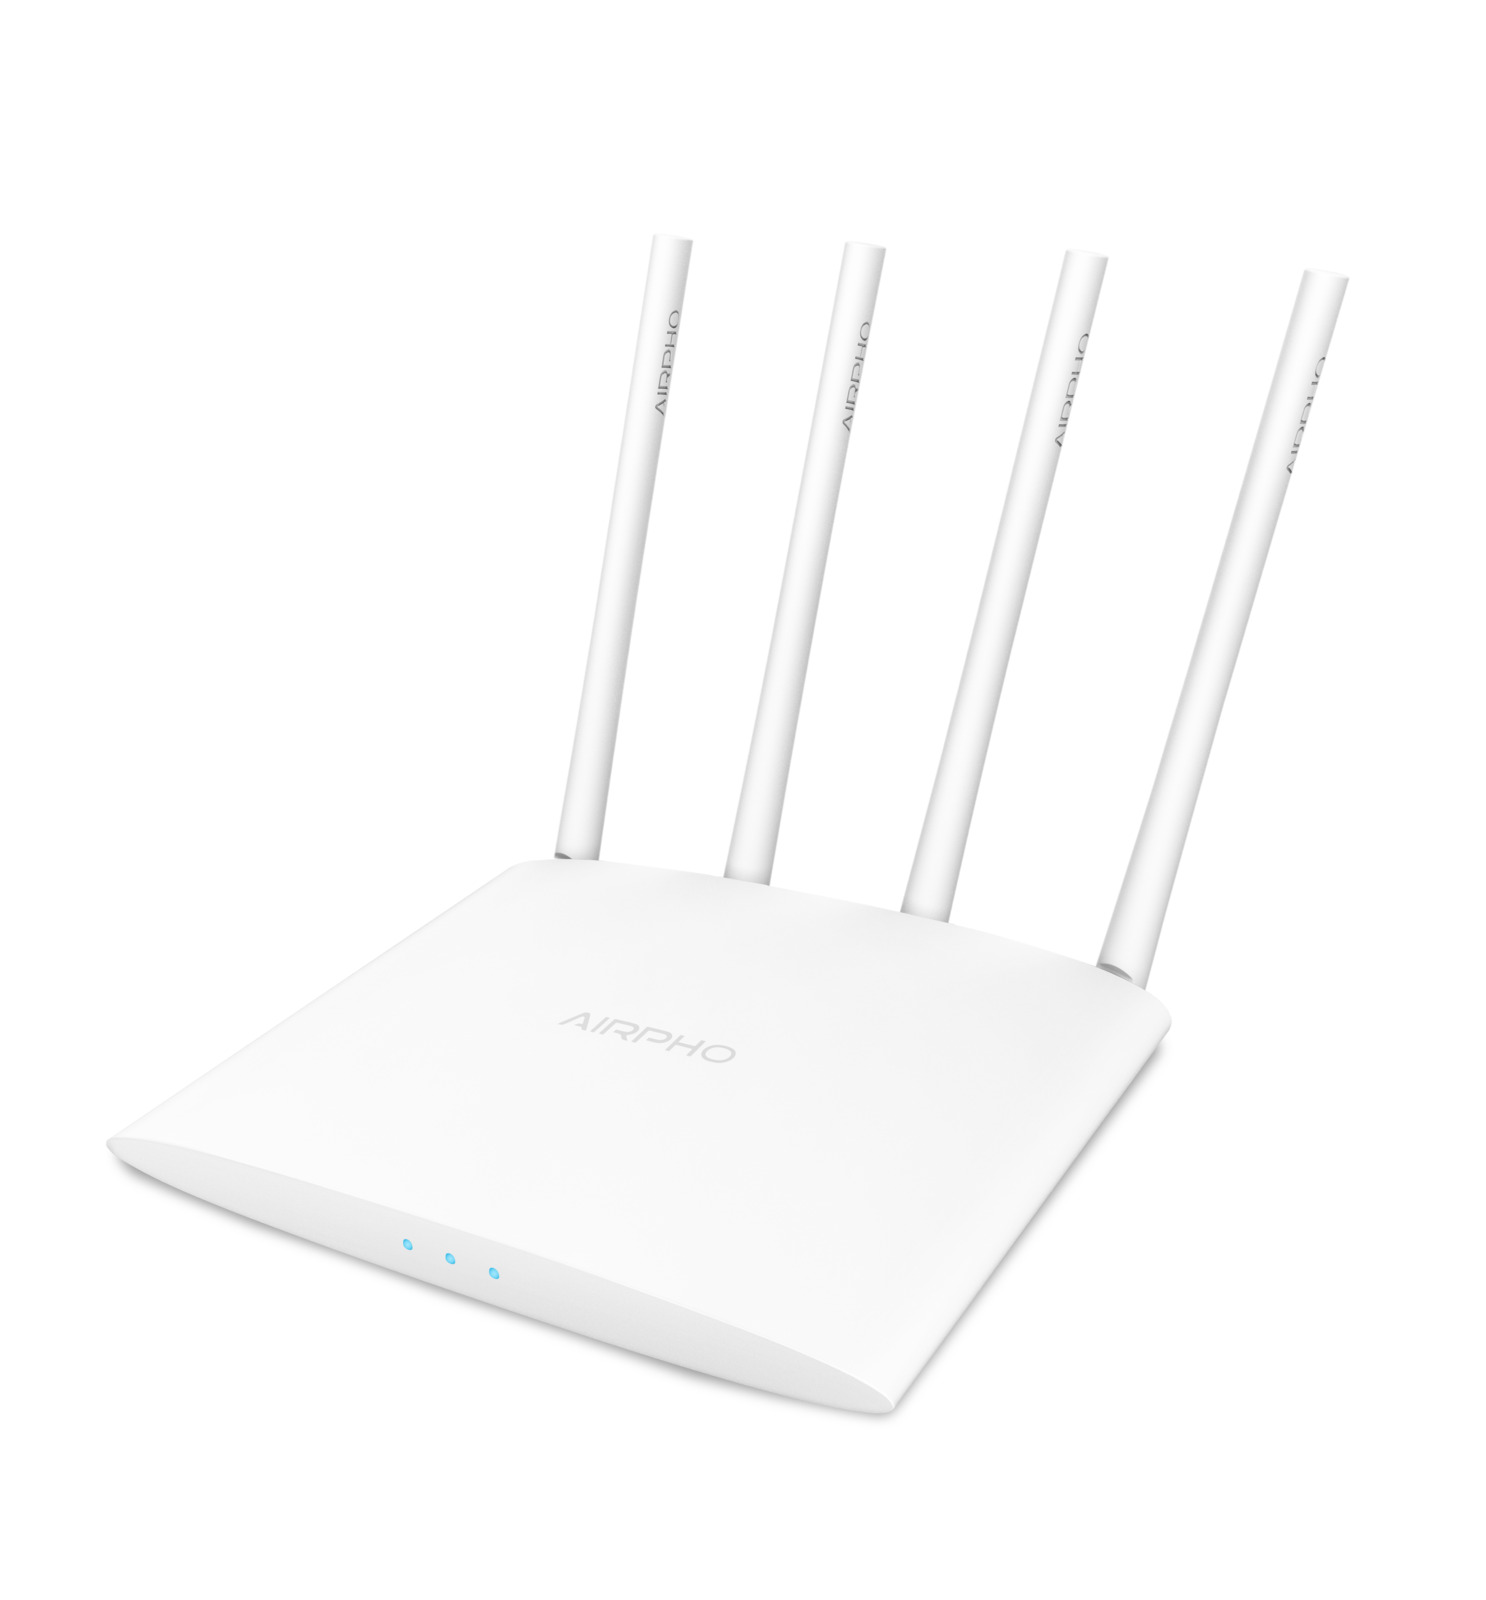 Mbit/s WLAN AR-W400 1200 AIRPHO Router